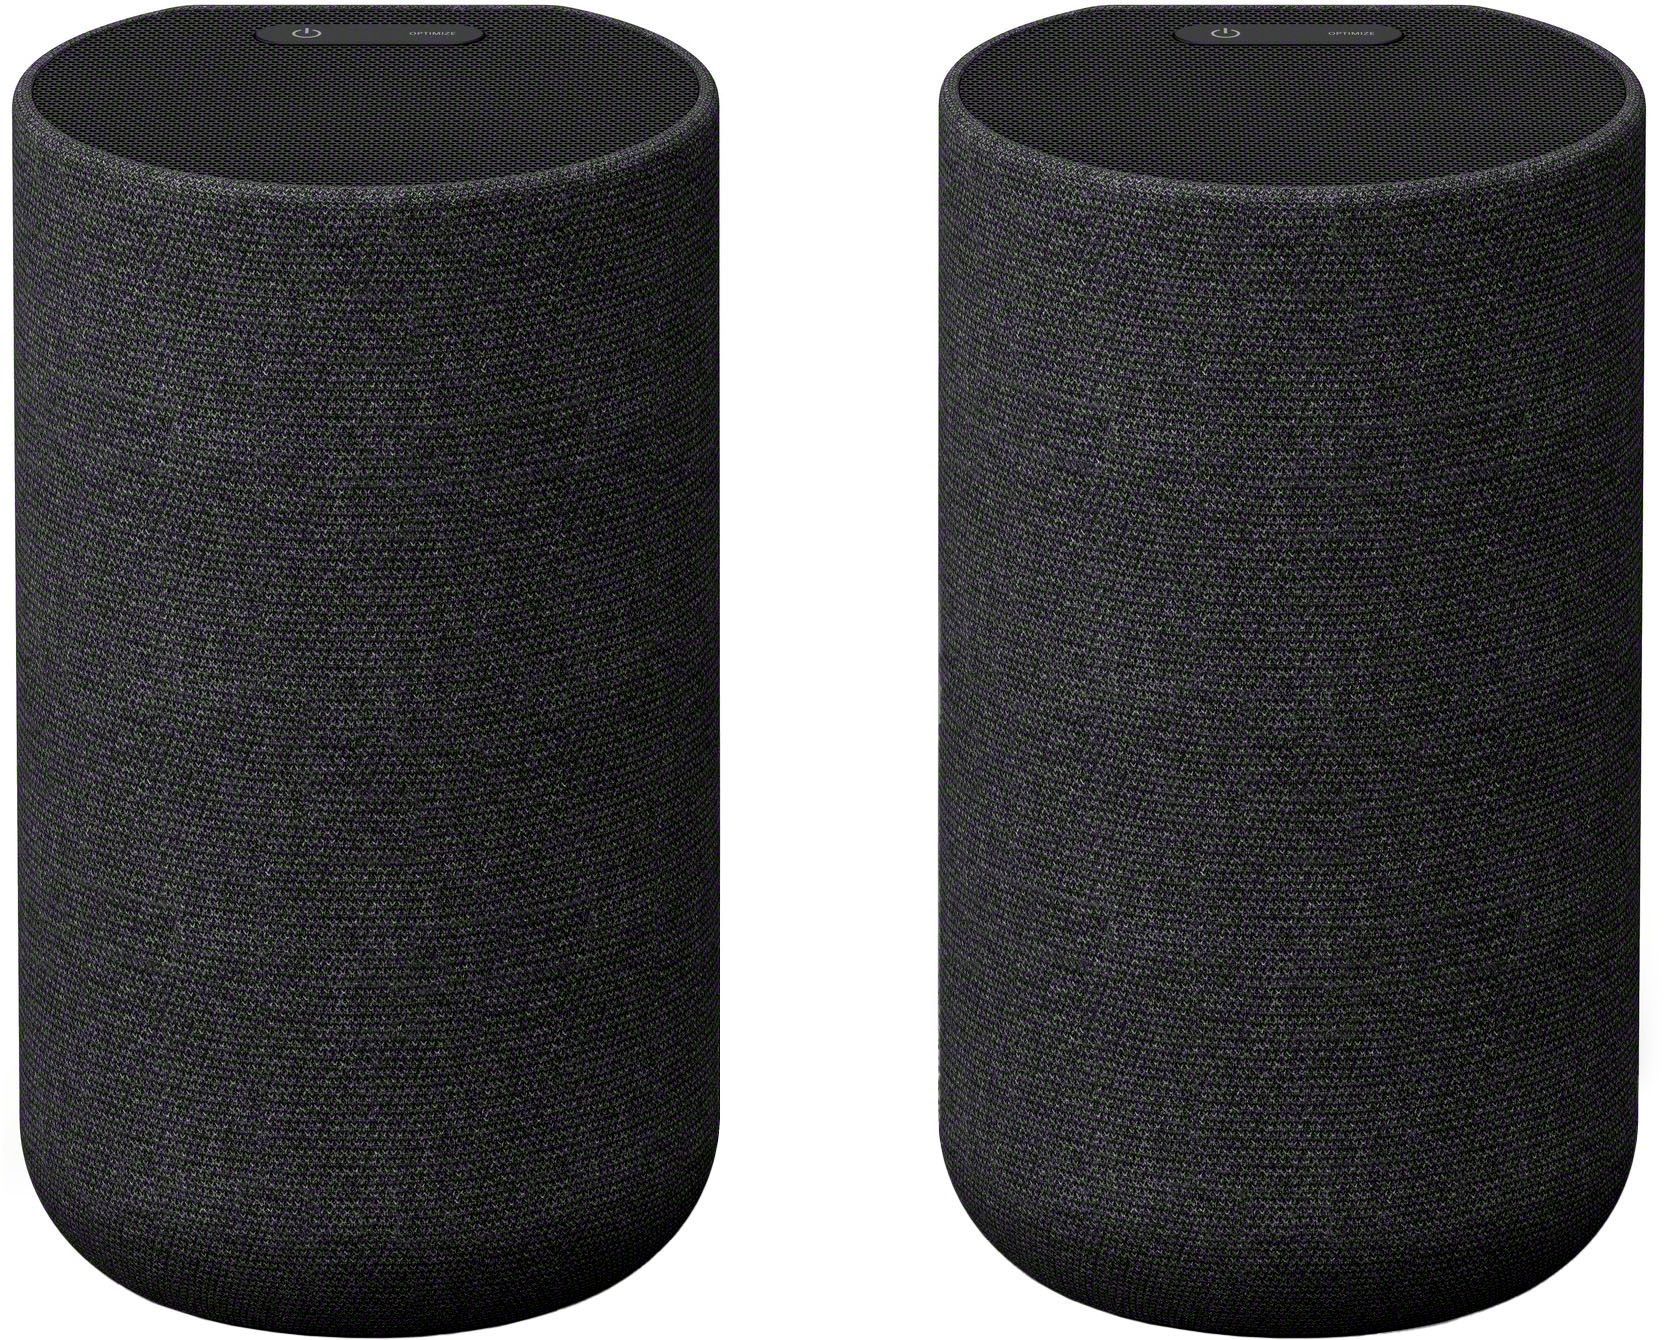 Sony SA -RS5 Wireless Rear Speakers with Built-in Battery for HT